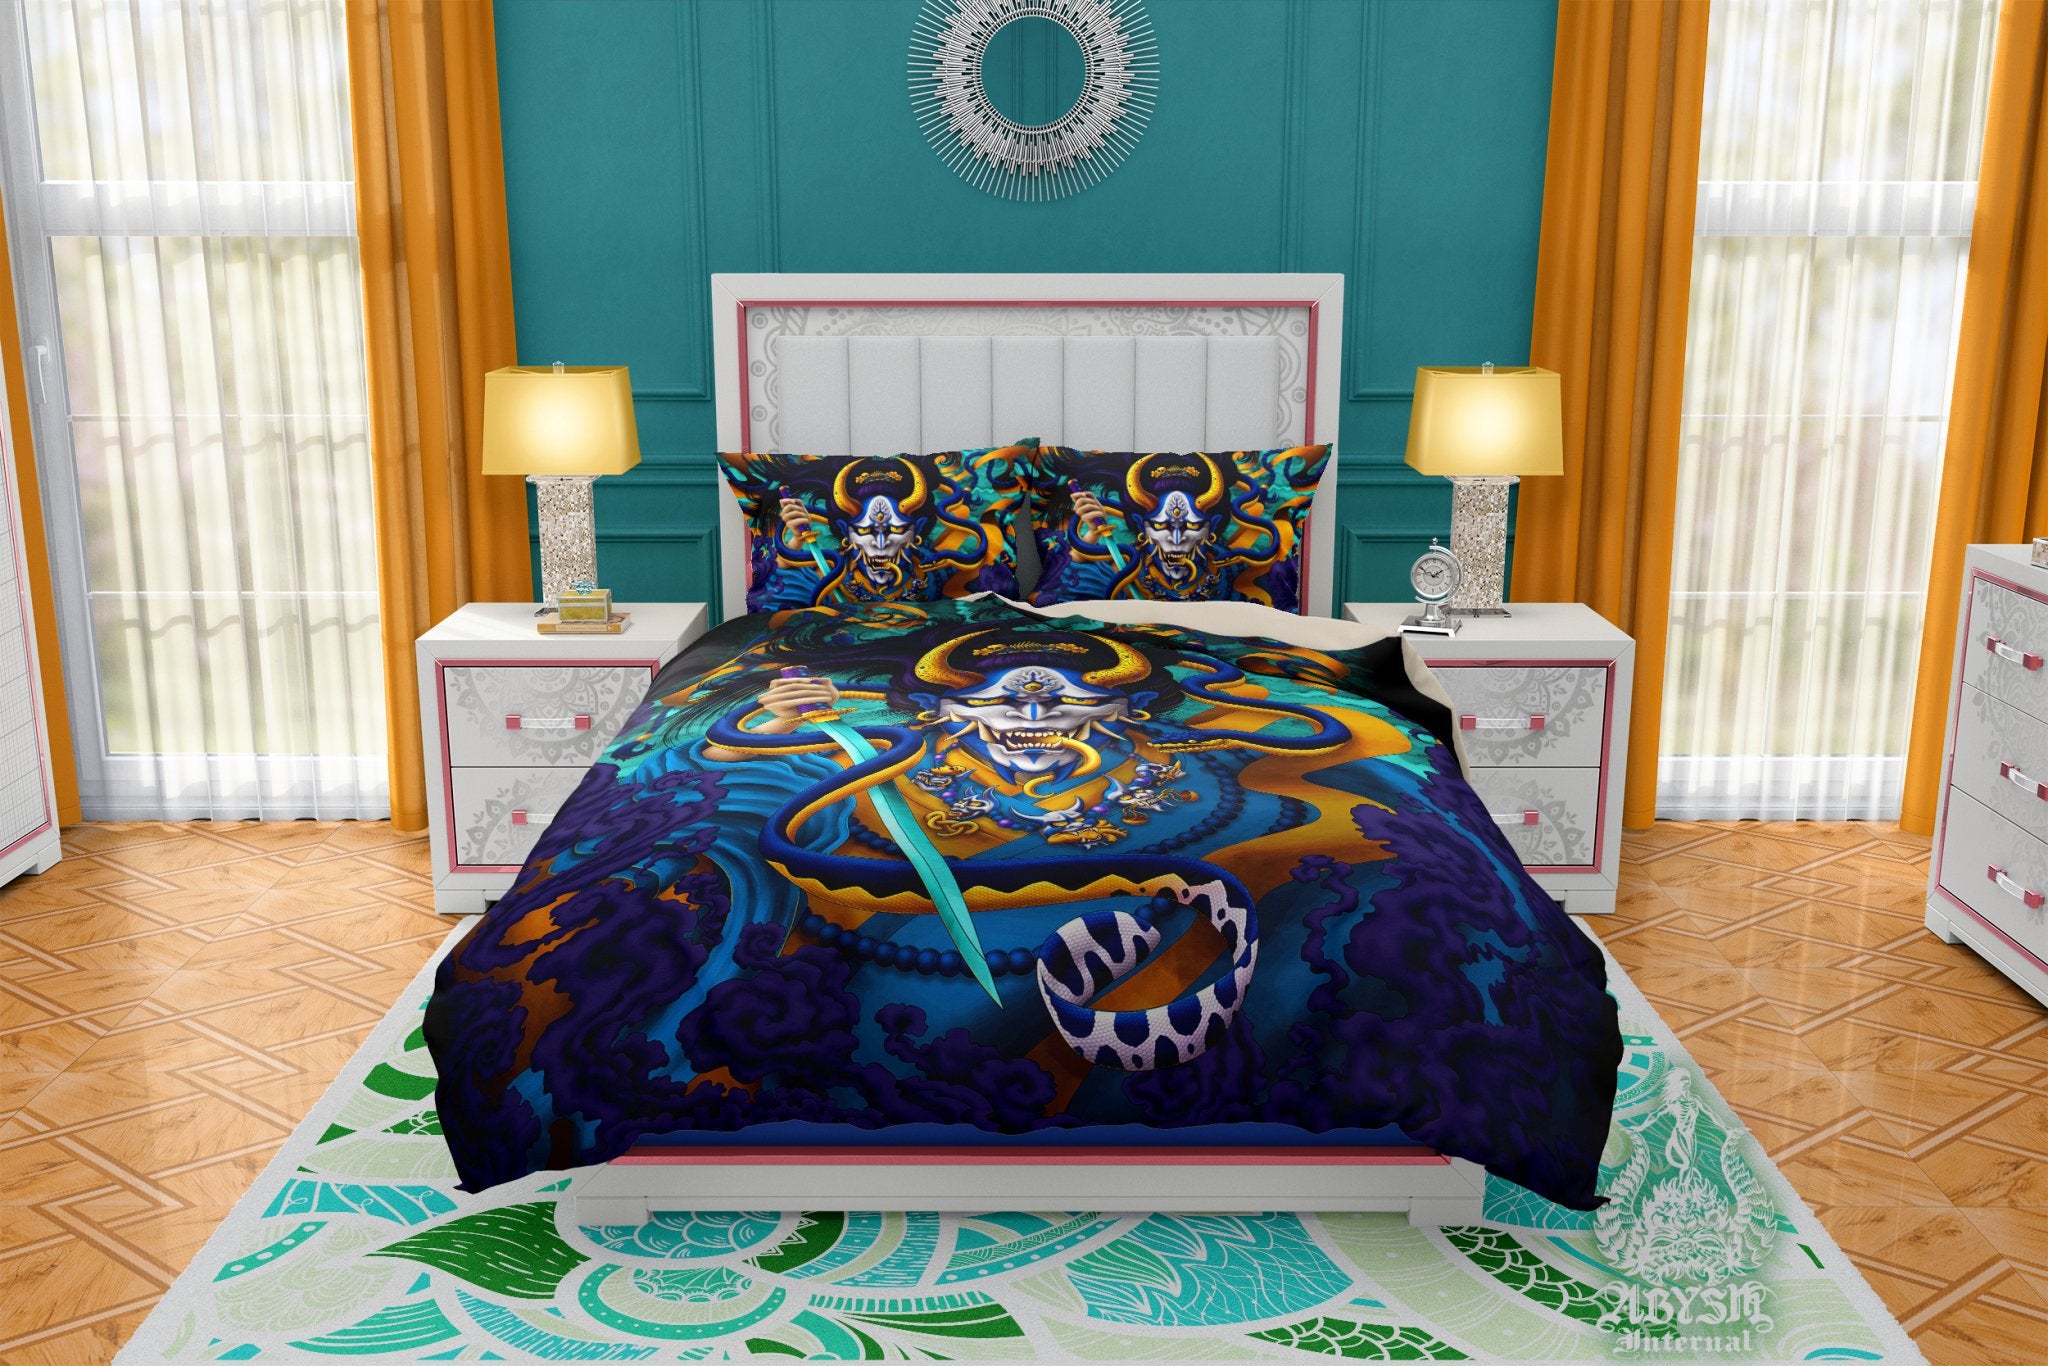 Hannya and Snake Bedding Set, Comforter or Duvet, Anime Bed Cover, Japanese Demon Bedroom Decor, King, Queen & Twin Size - Cyan Gold - Abysm Internal